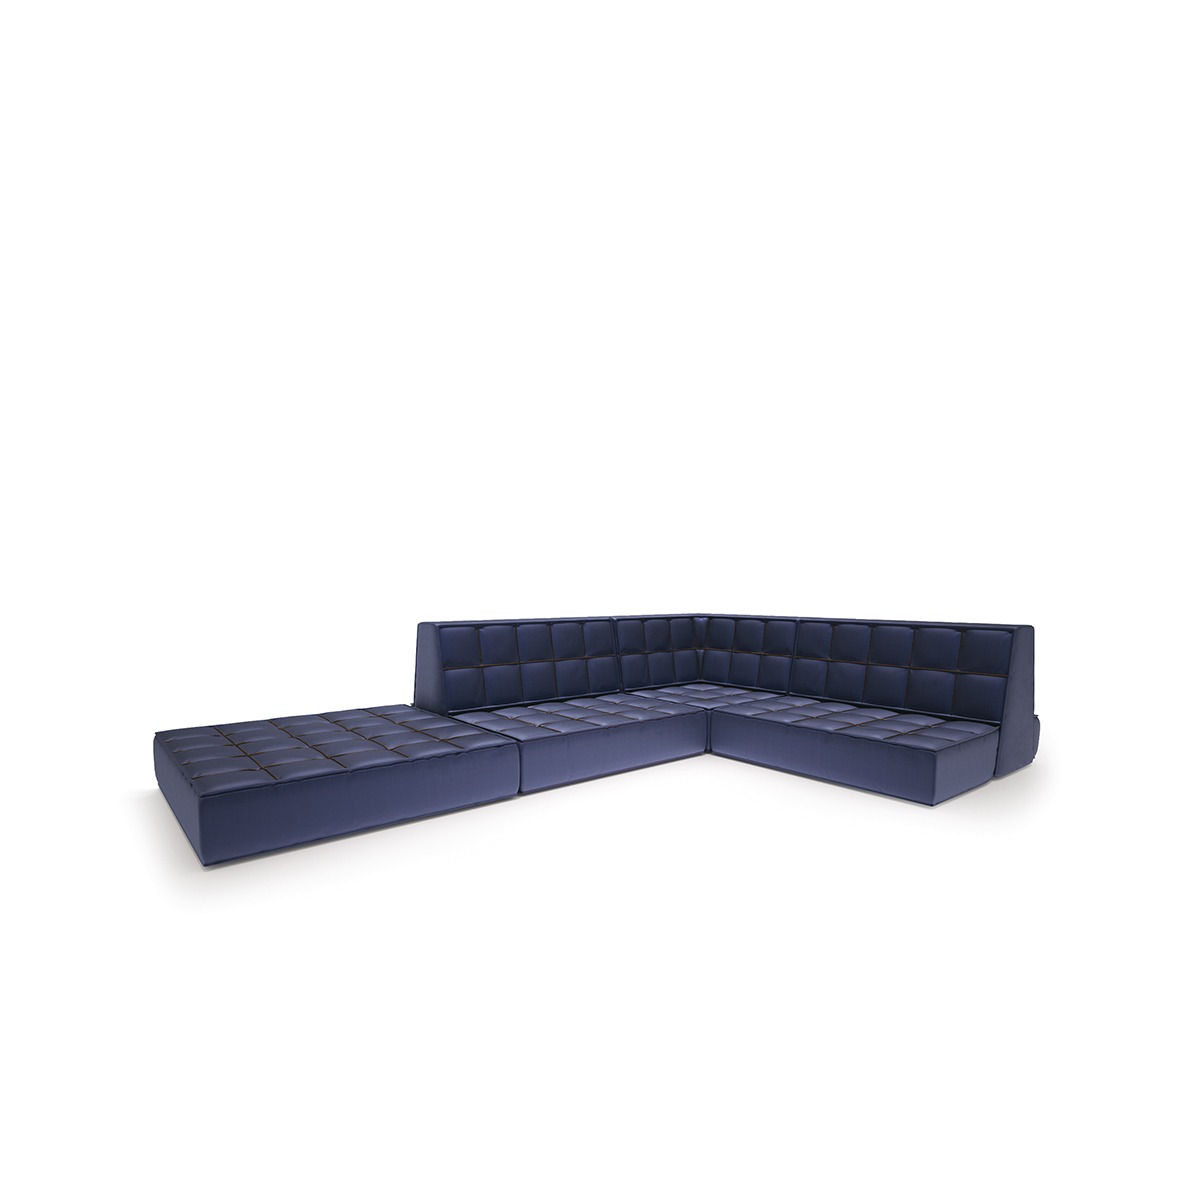 myface outdoor furniture mo sofa 1 300 ESSENTIAL HOME